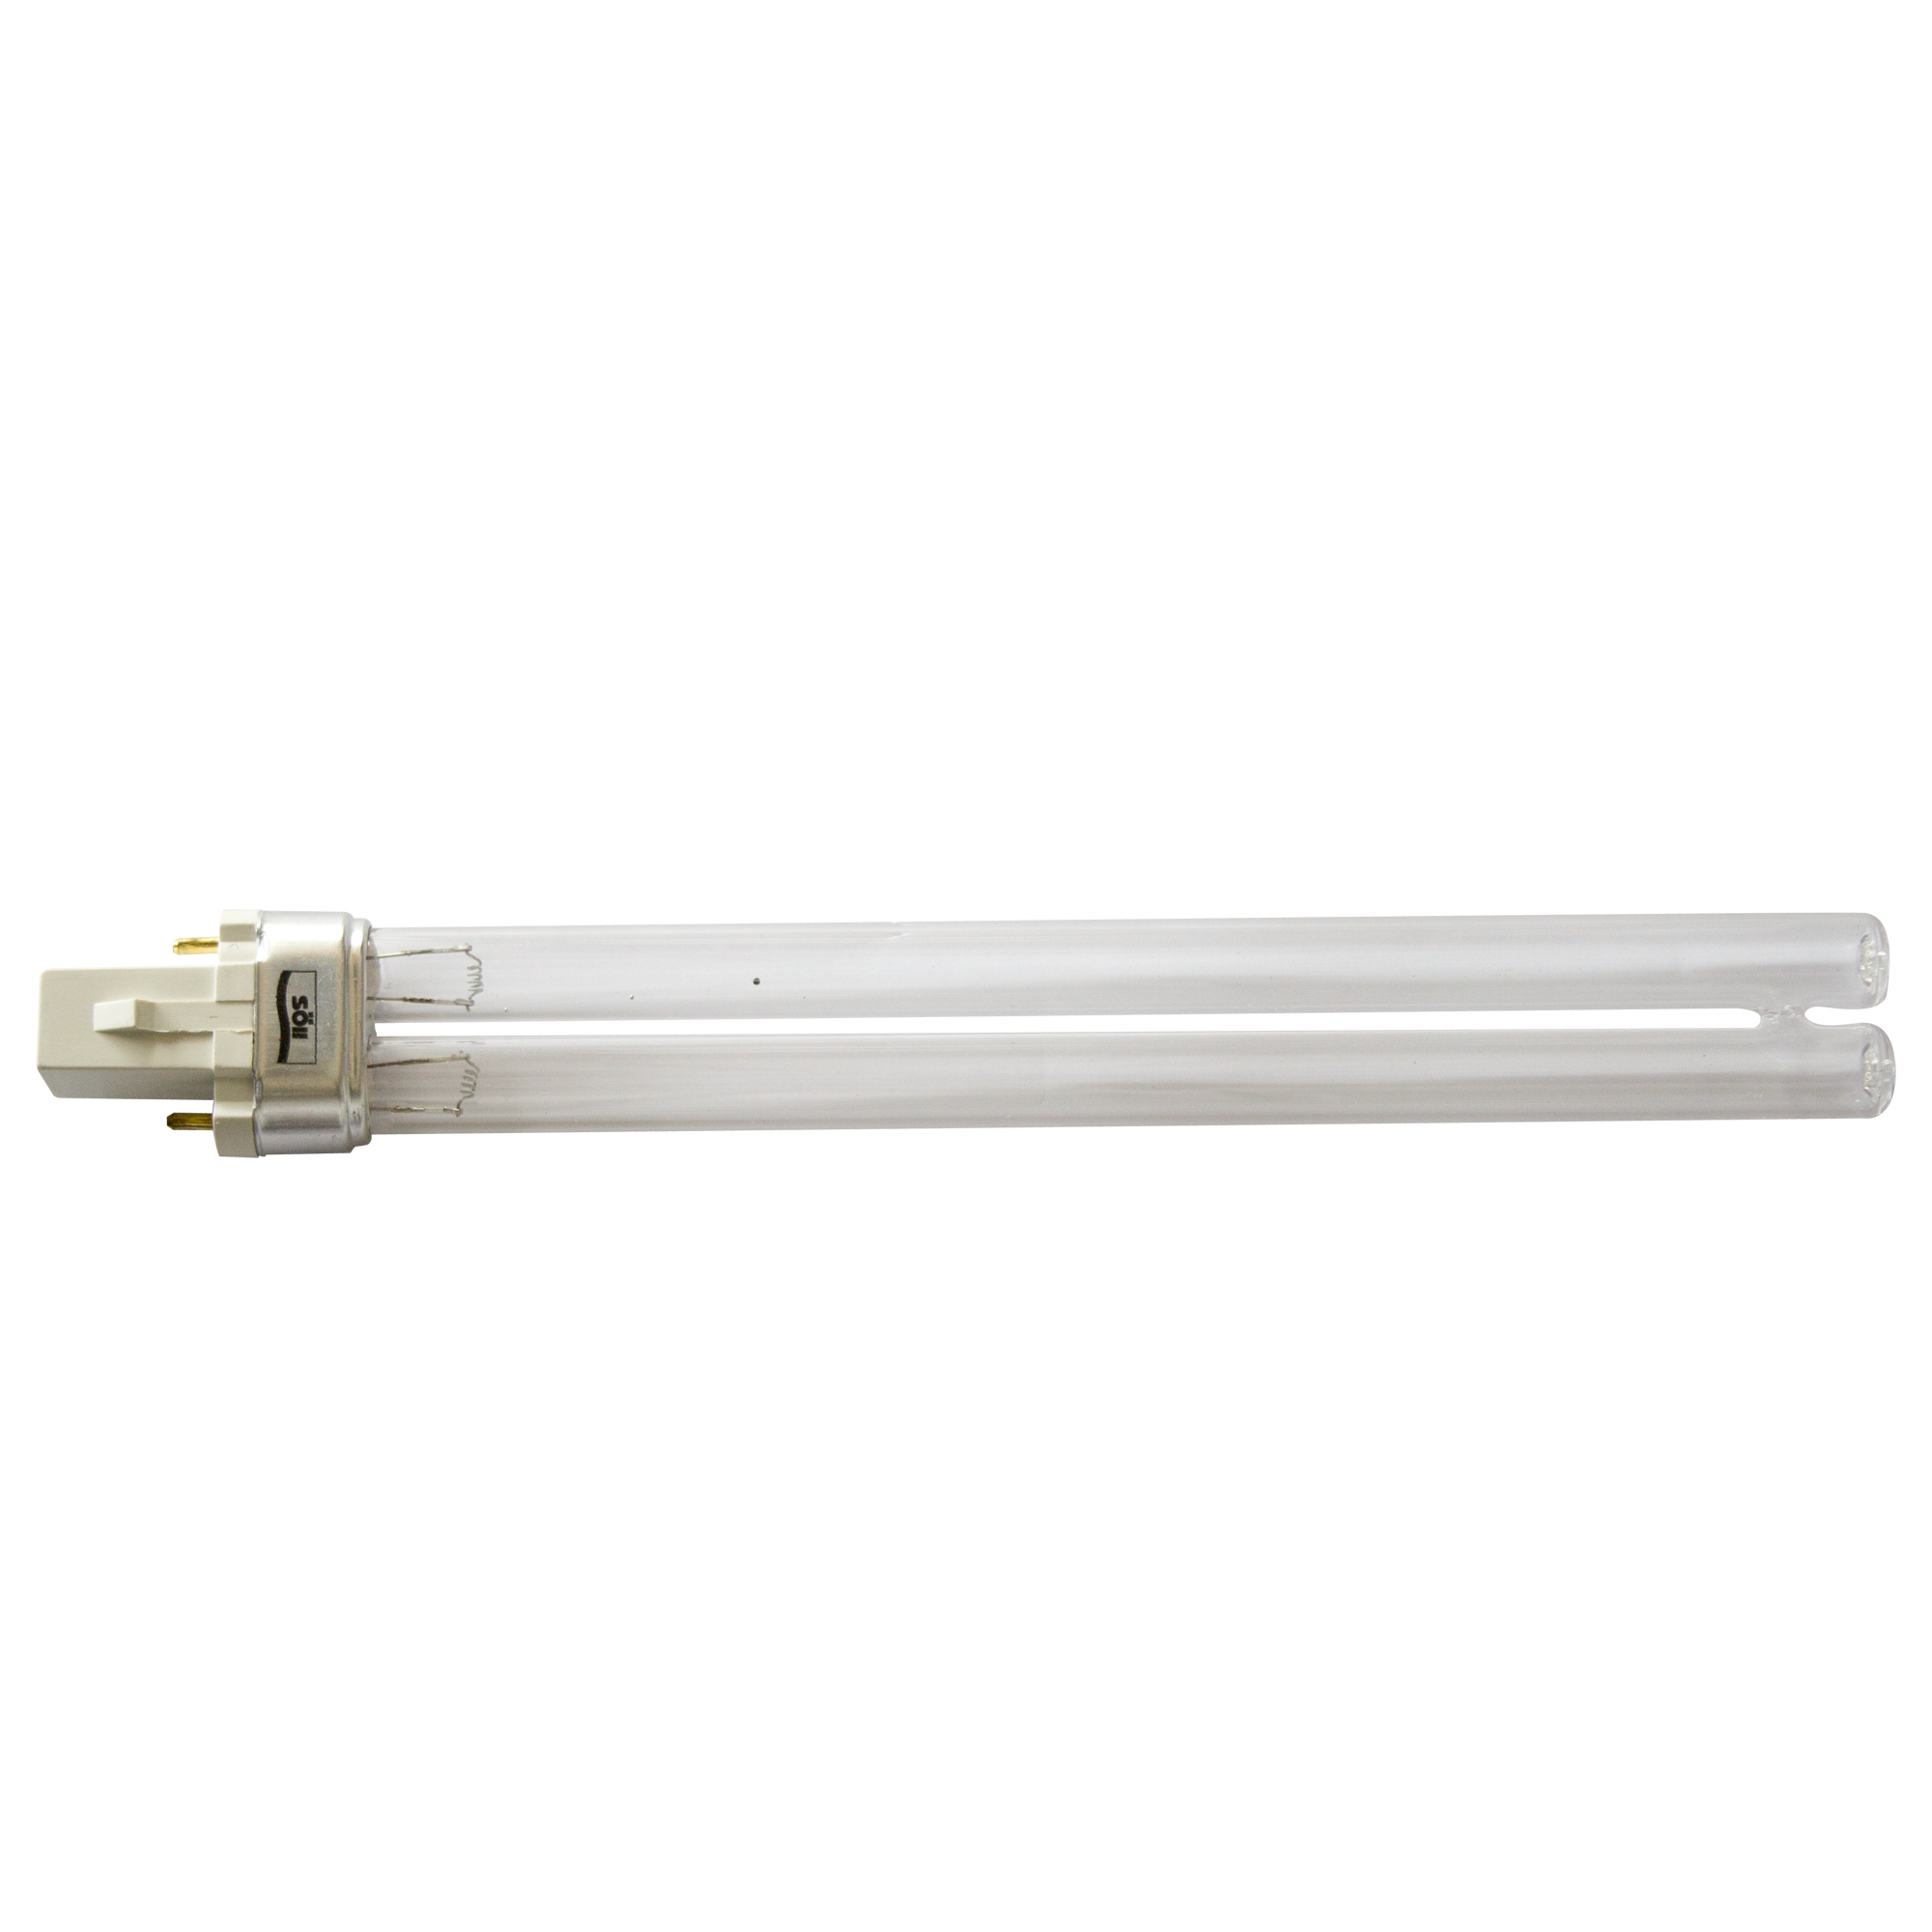 UV-Lampe 18 W/220 V + product picture